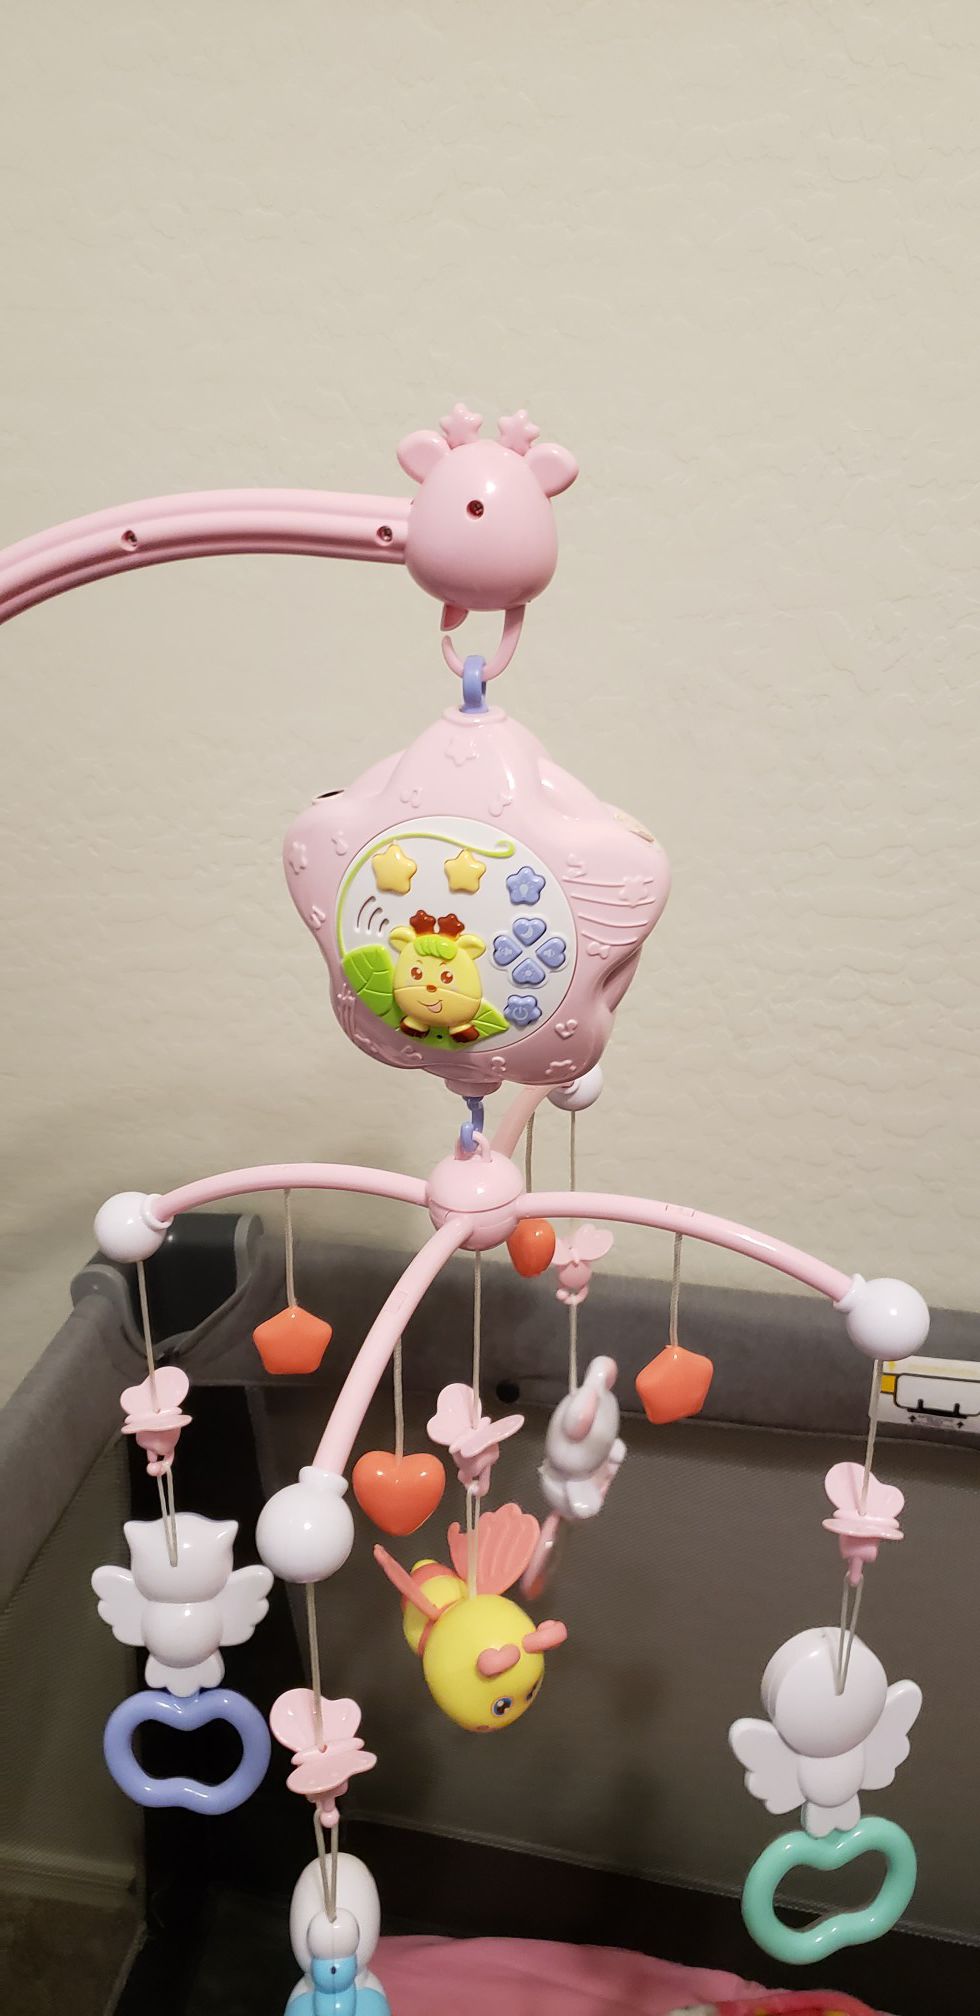 Musical light up baby mobile with a remote